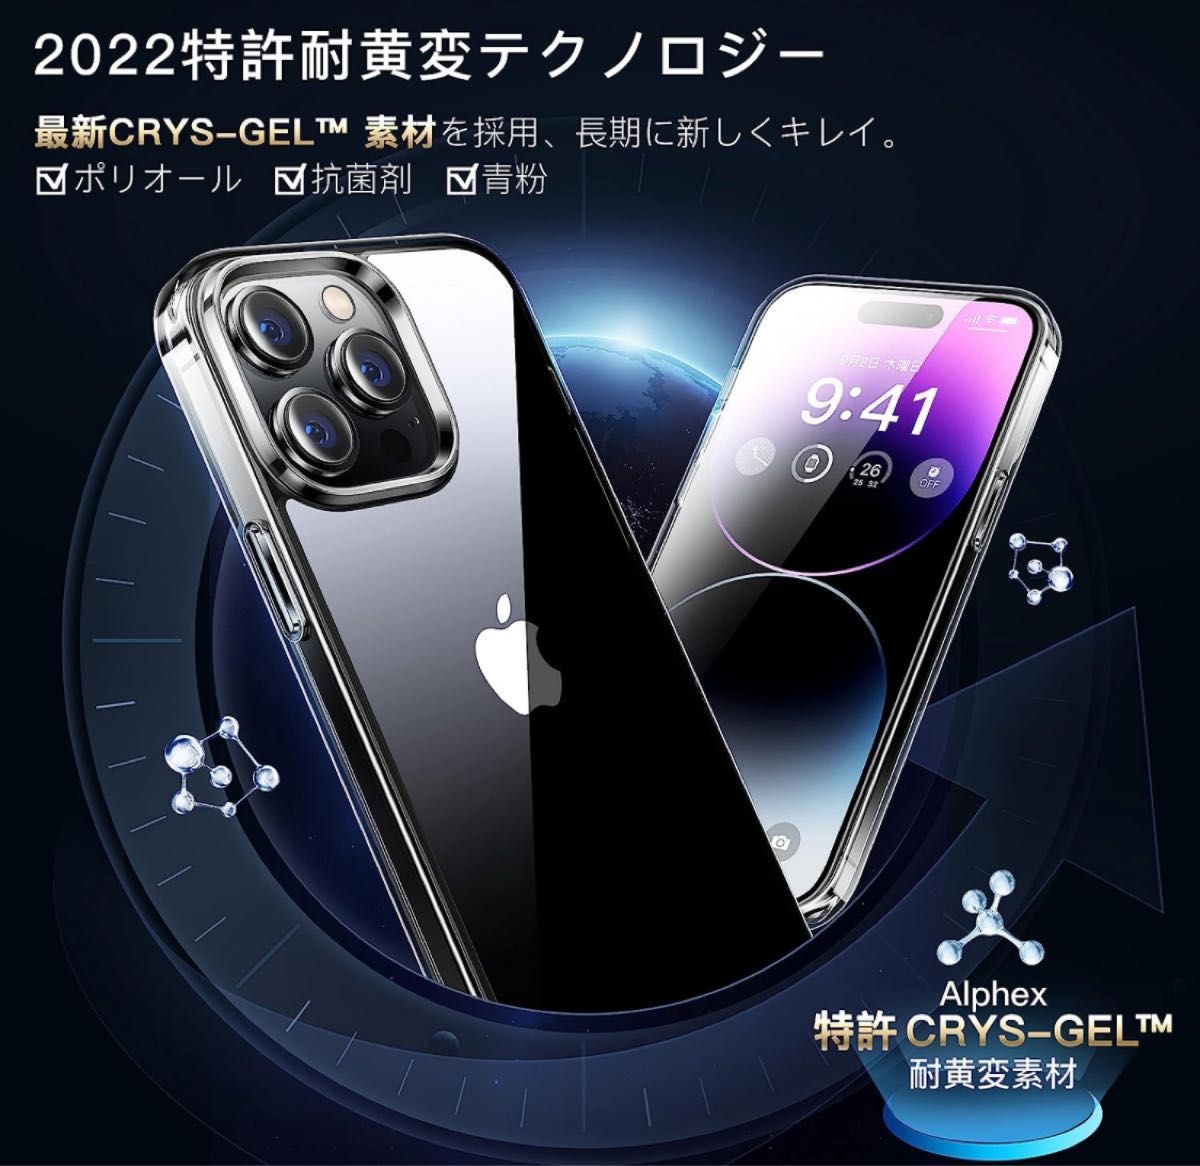 iPhone14promax用 フィルム付き iPhoneケース 全面保護セット クリア